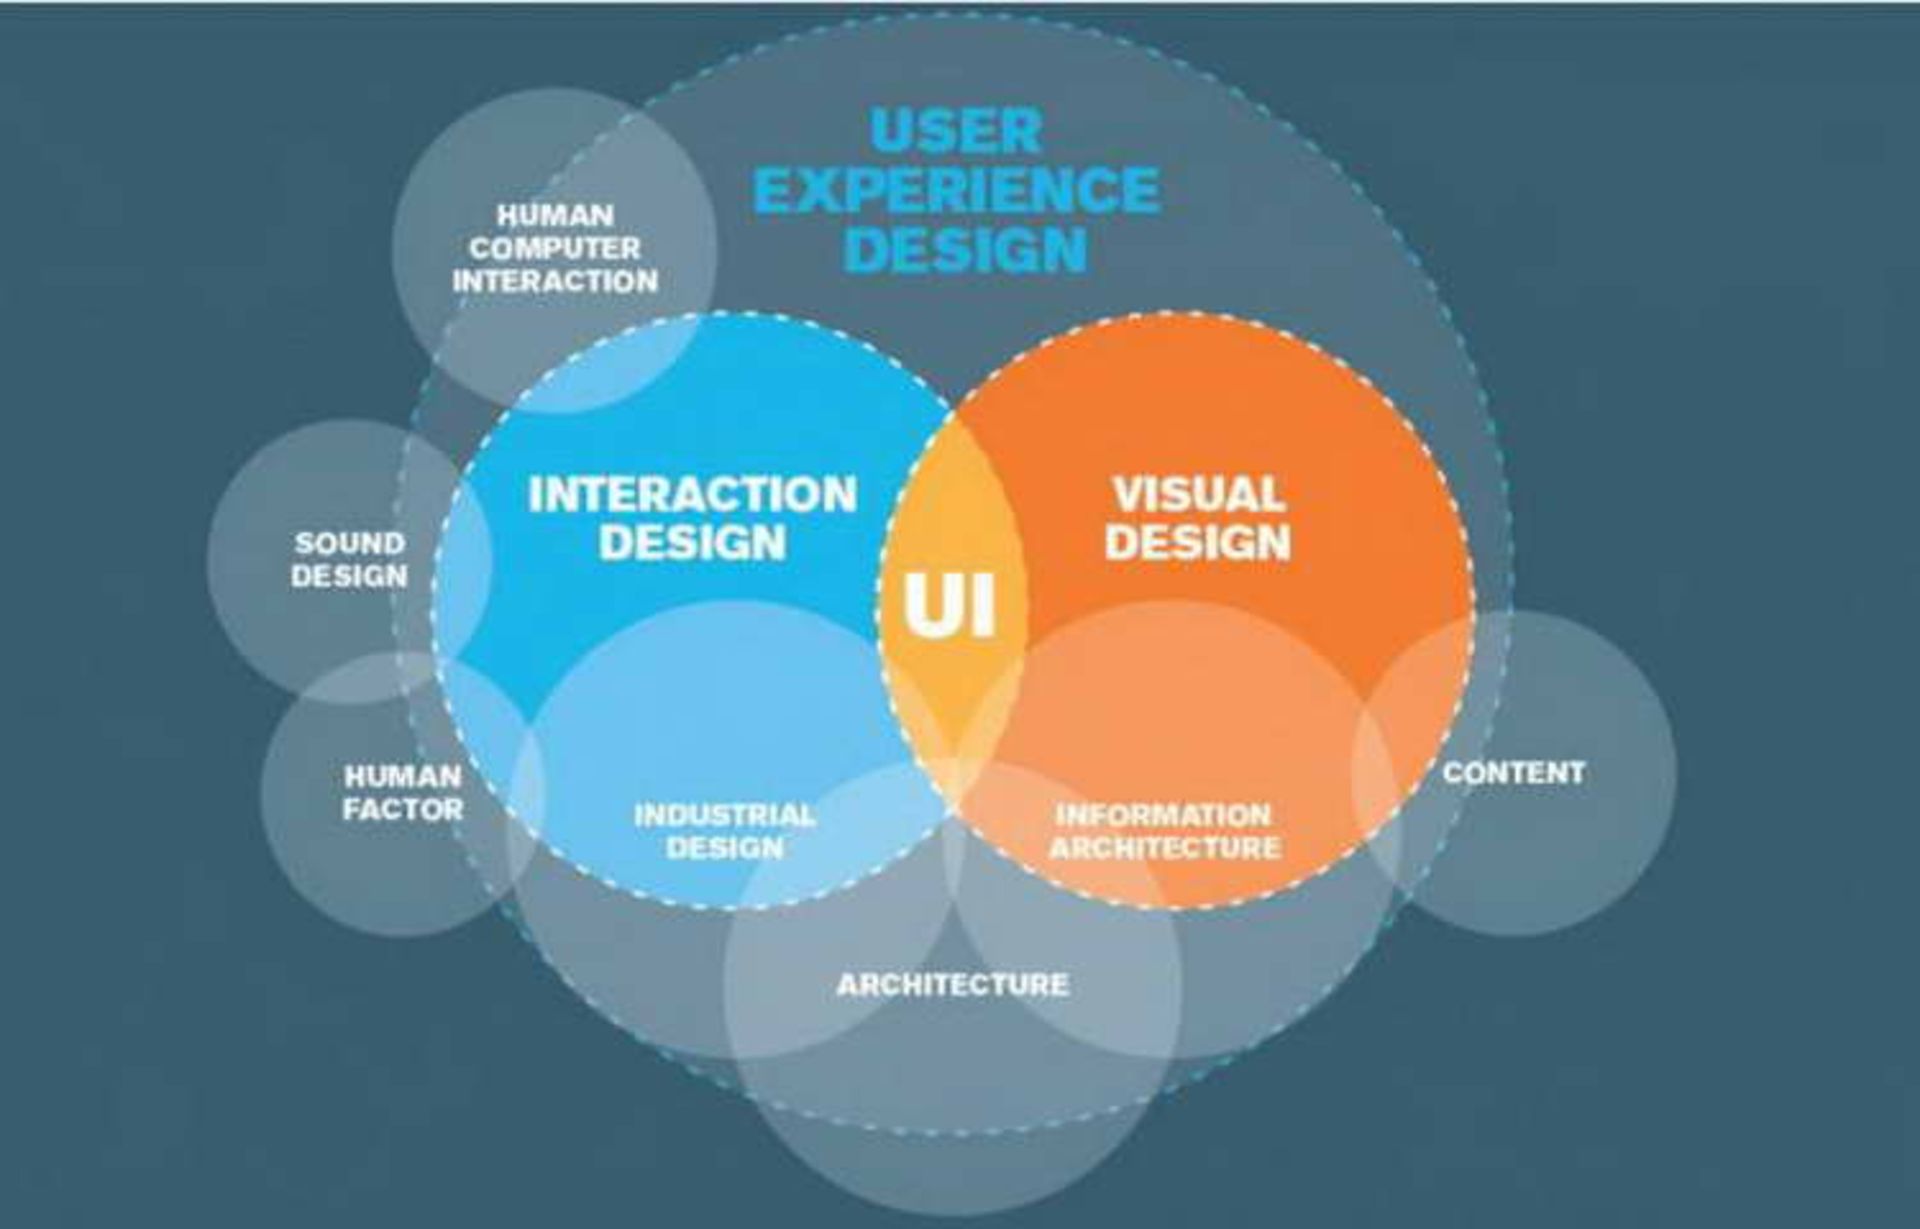 difference between IA and UX